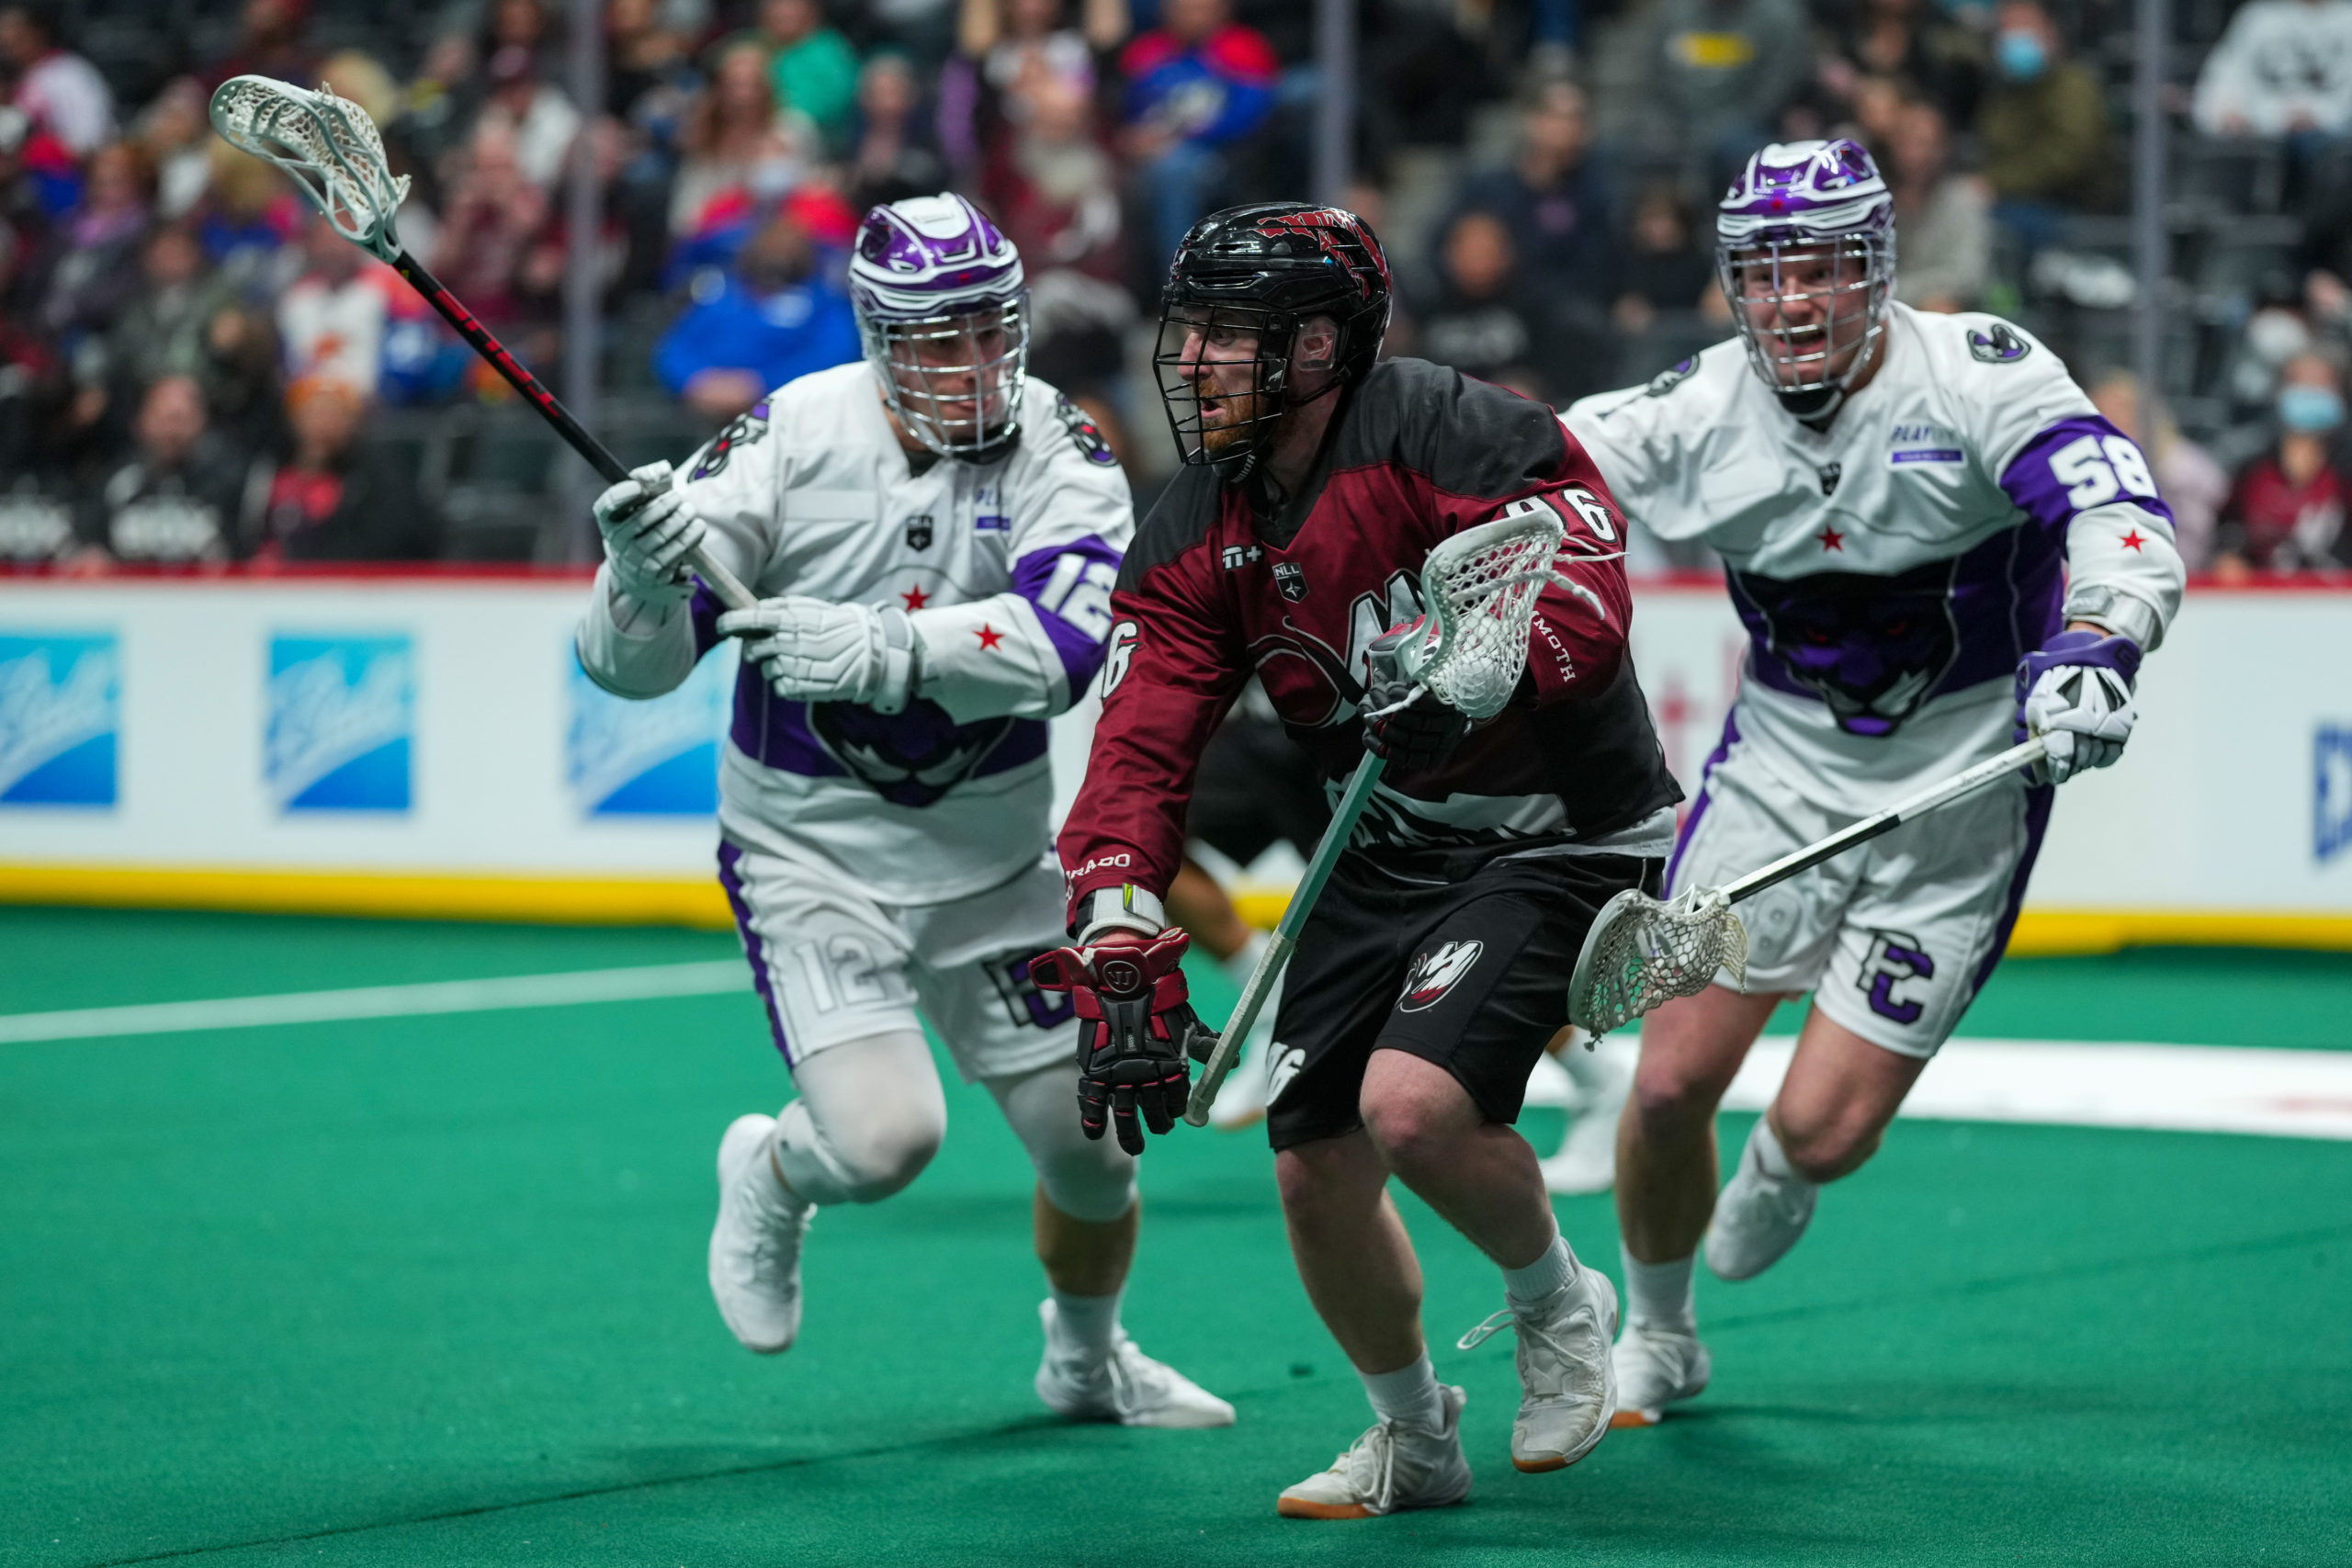 New York Riptide Acquire Connor Kearnan From San Diego Seals In Trade - New  York Riptide